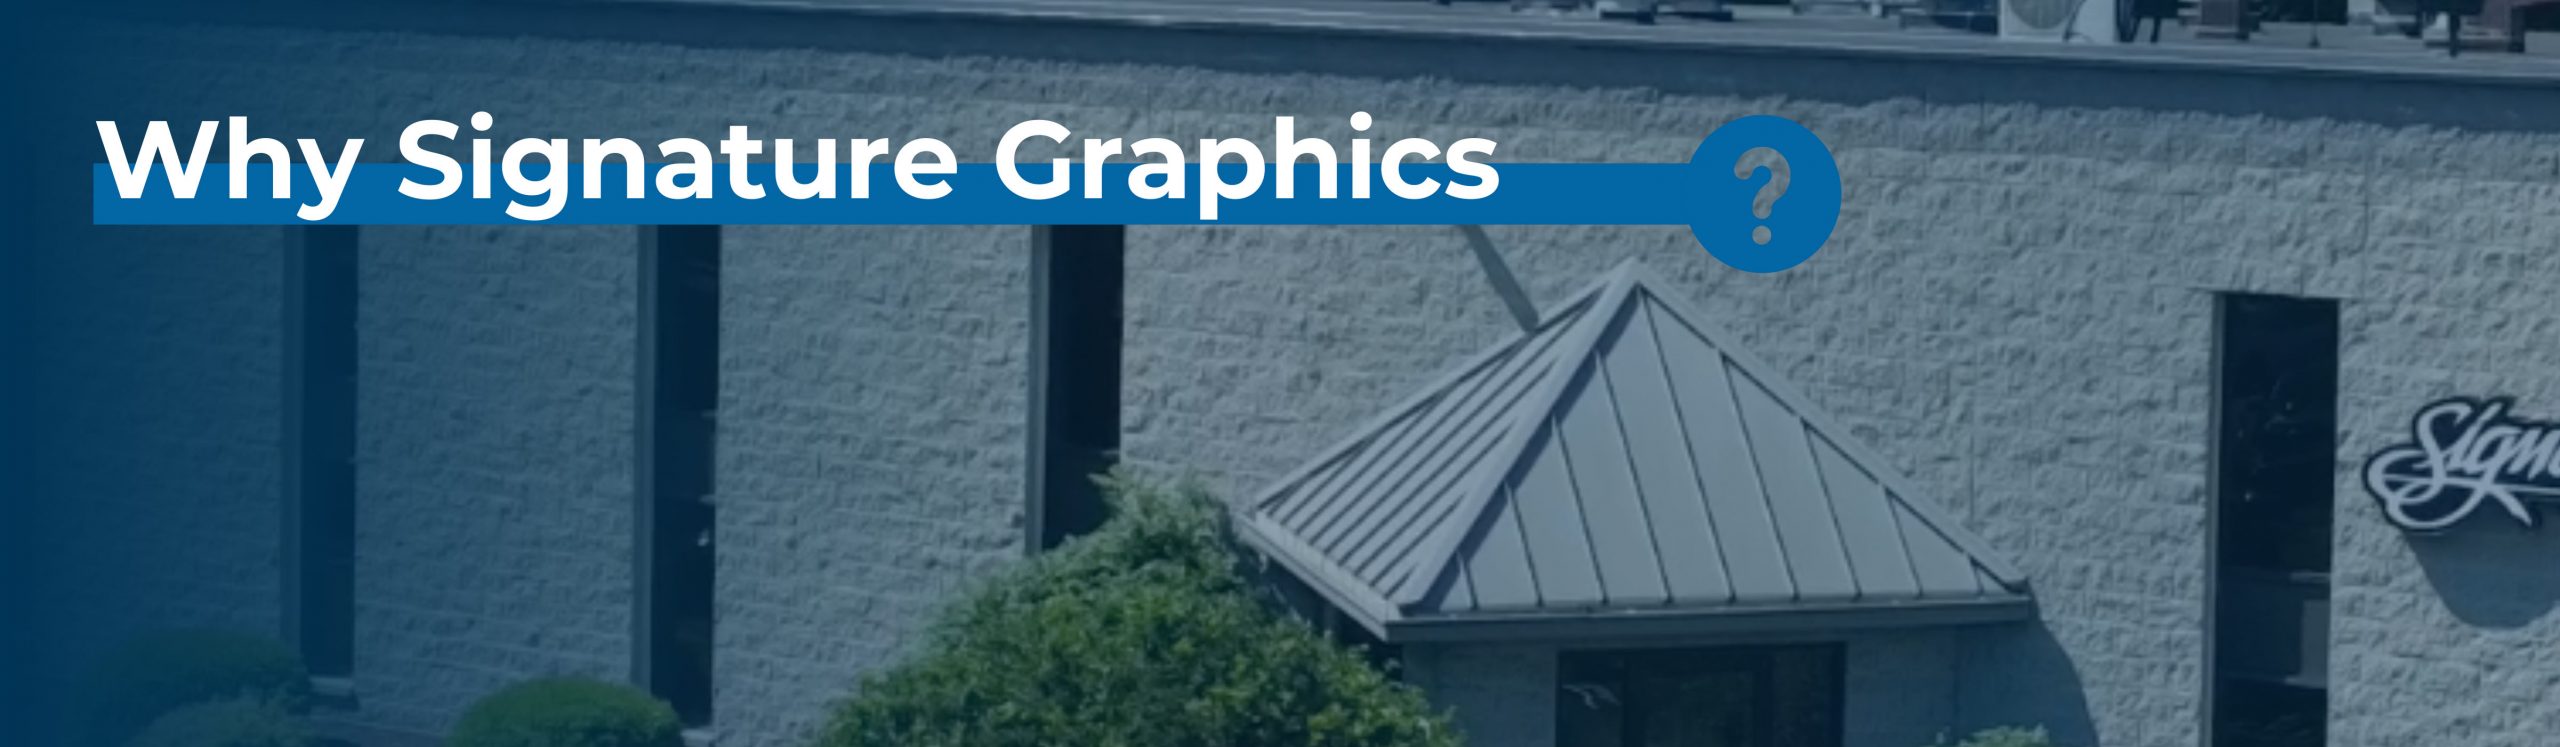 Why Choose Signature Graphics